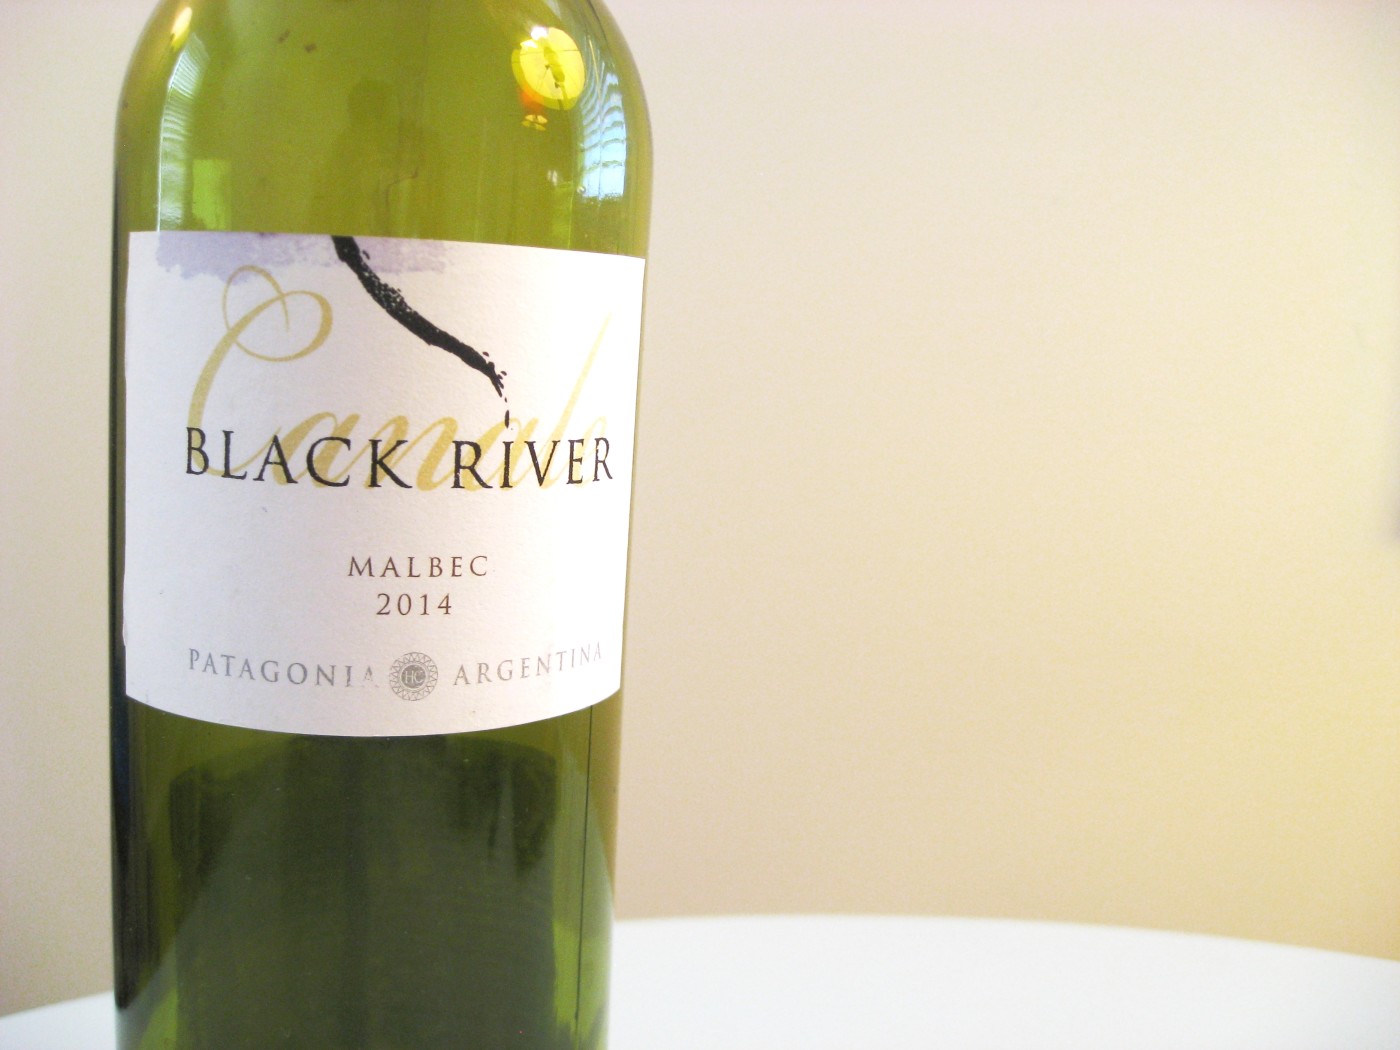 Canale Black River, Malbec 2014, Patagonia, Argentina, Wine Casual